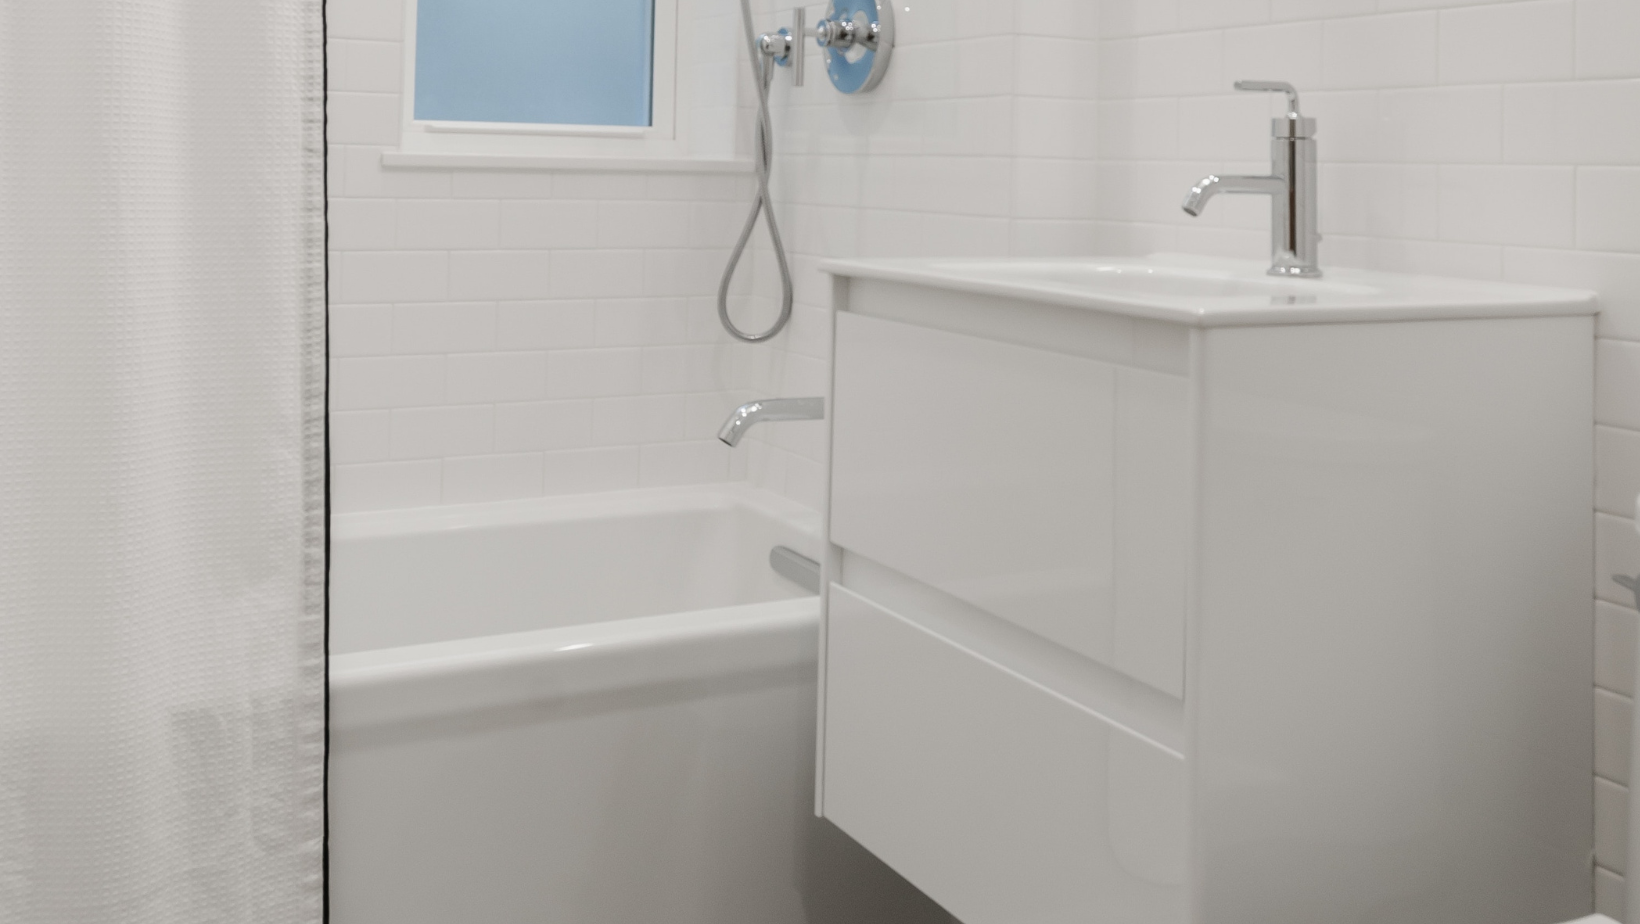 A clean white vanity paired with a white wall can dramatically increase the space perception of your small bathroom.